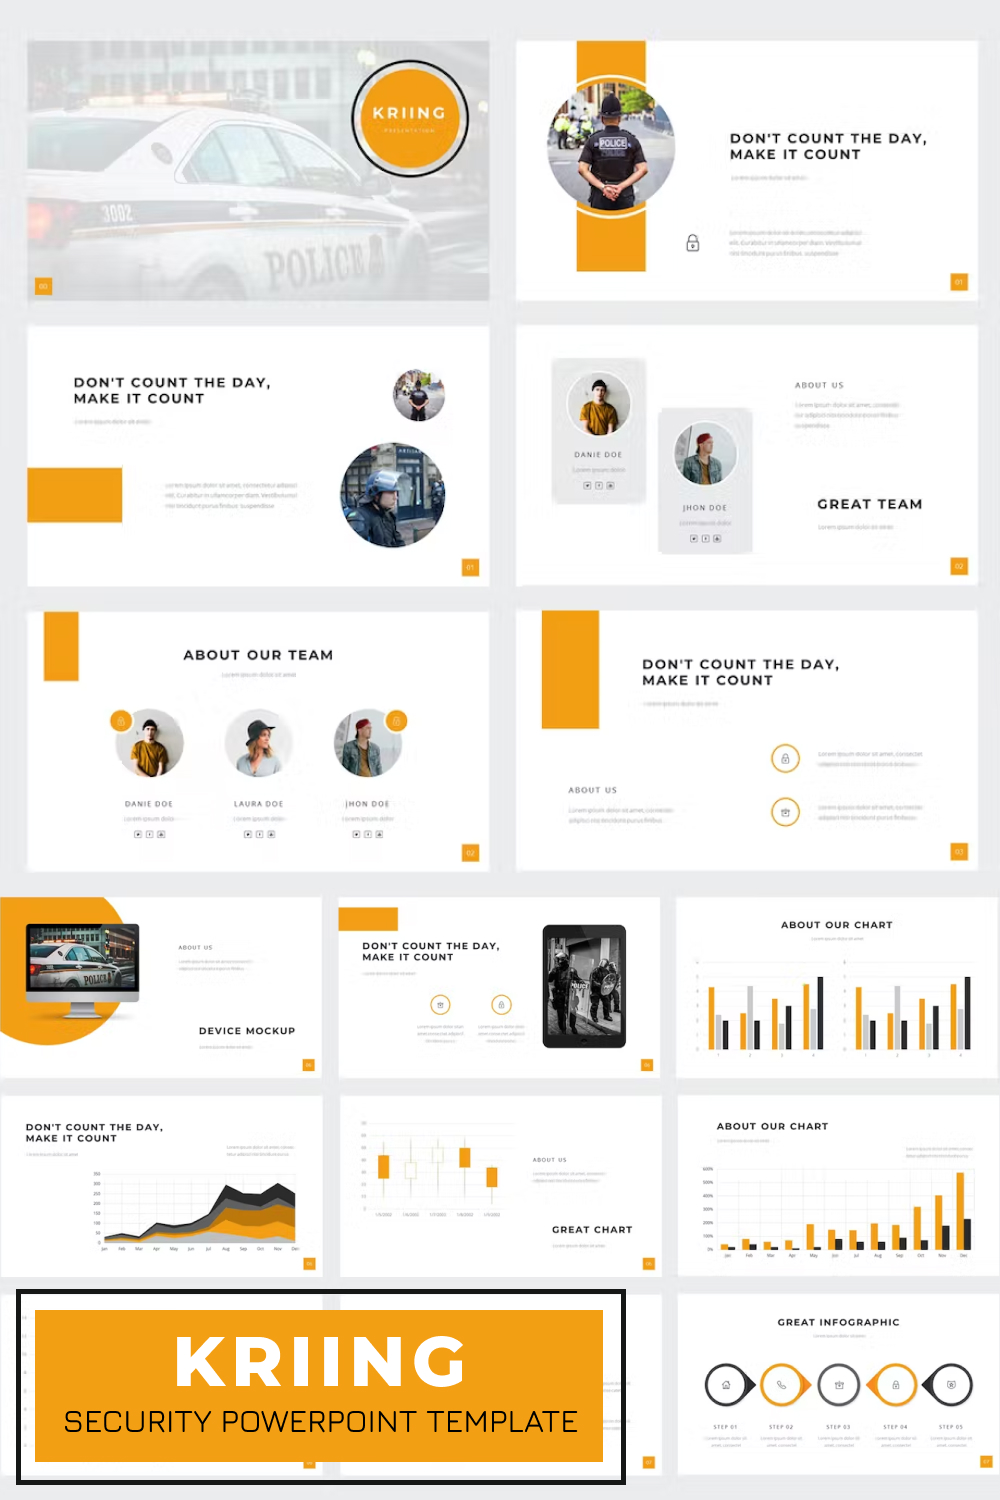 Kriing security powerpoint template of pinterest.